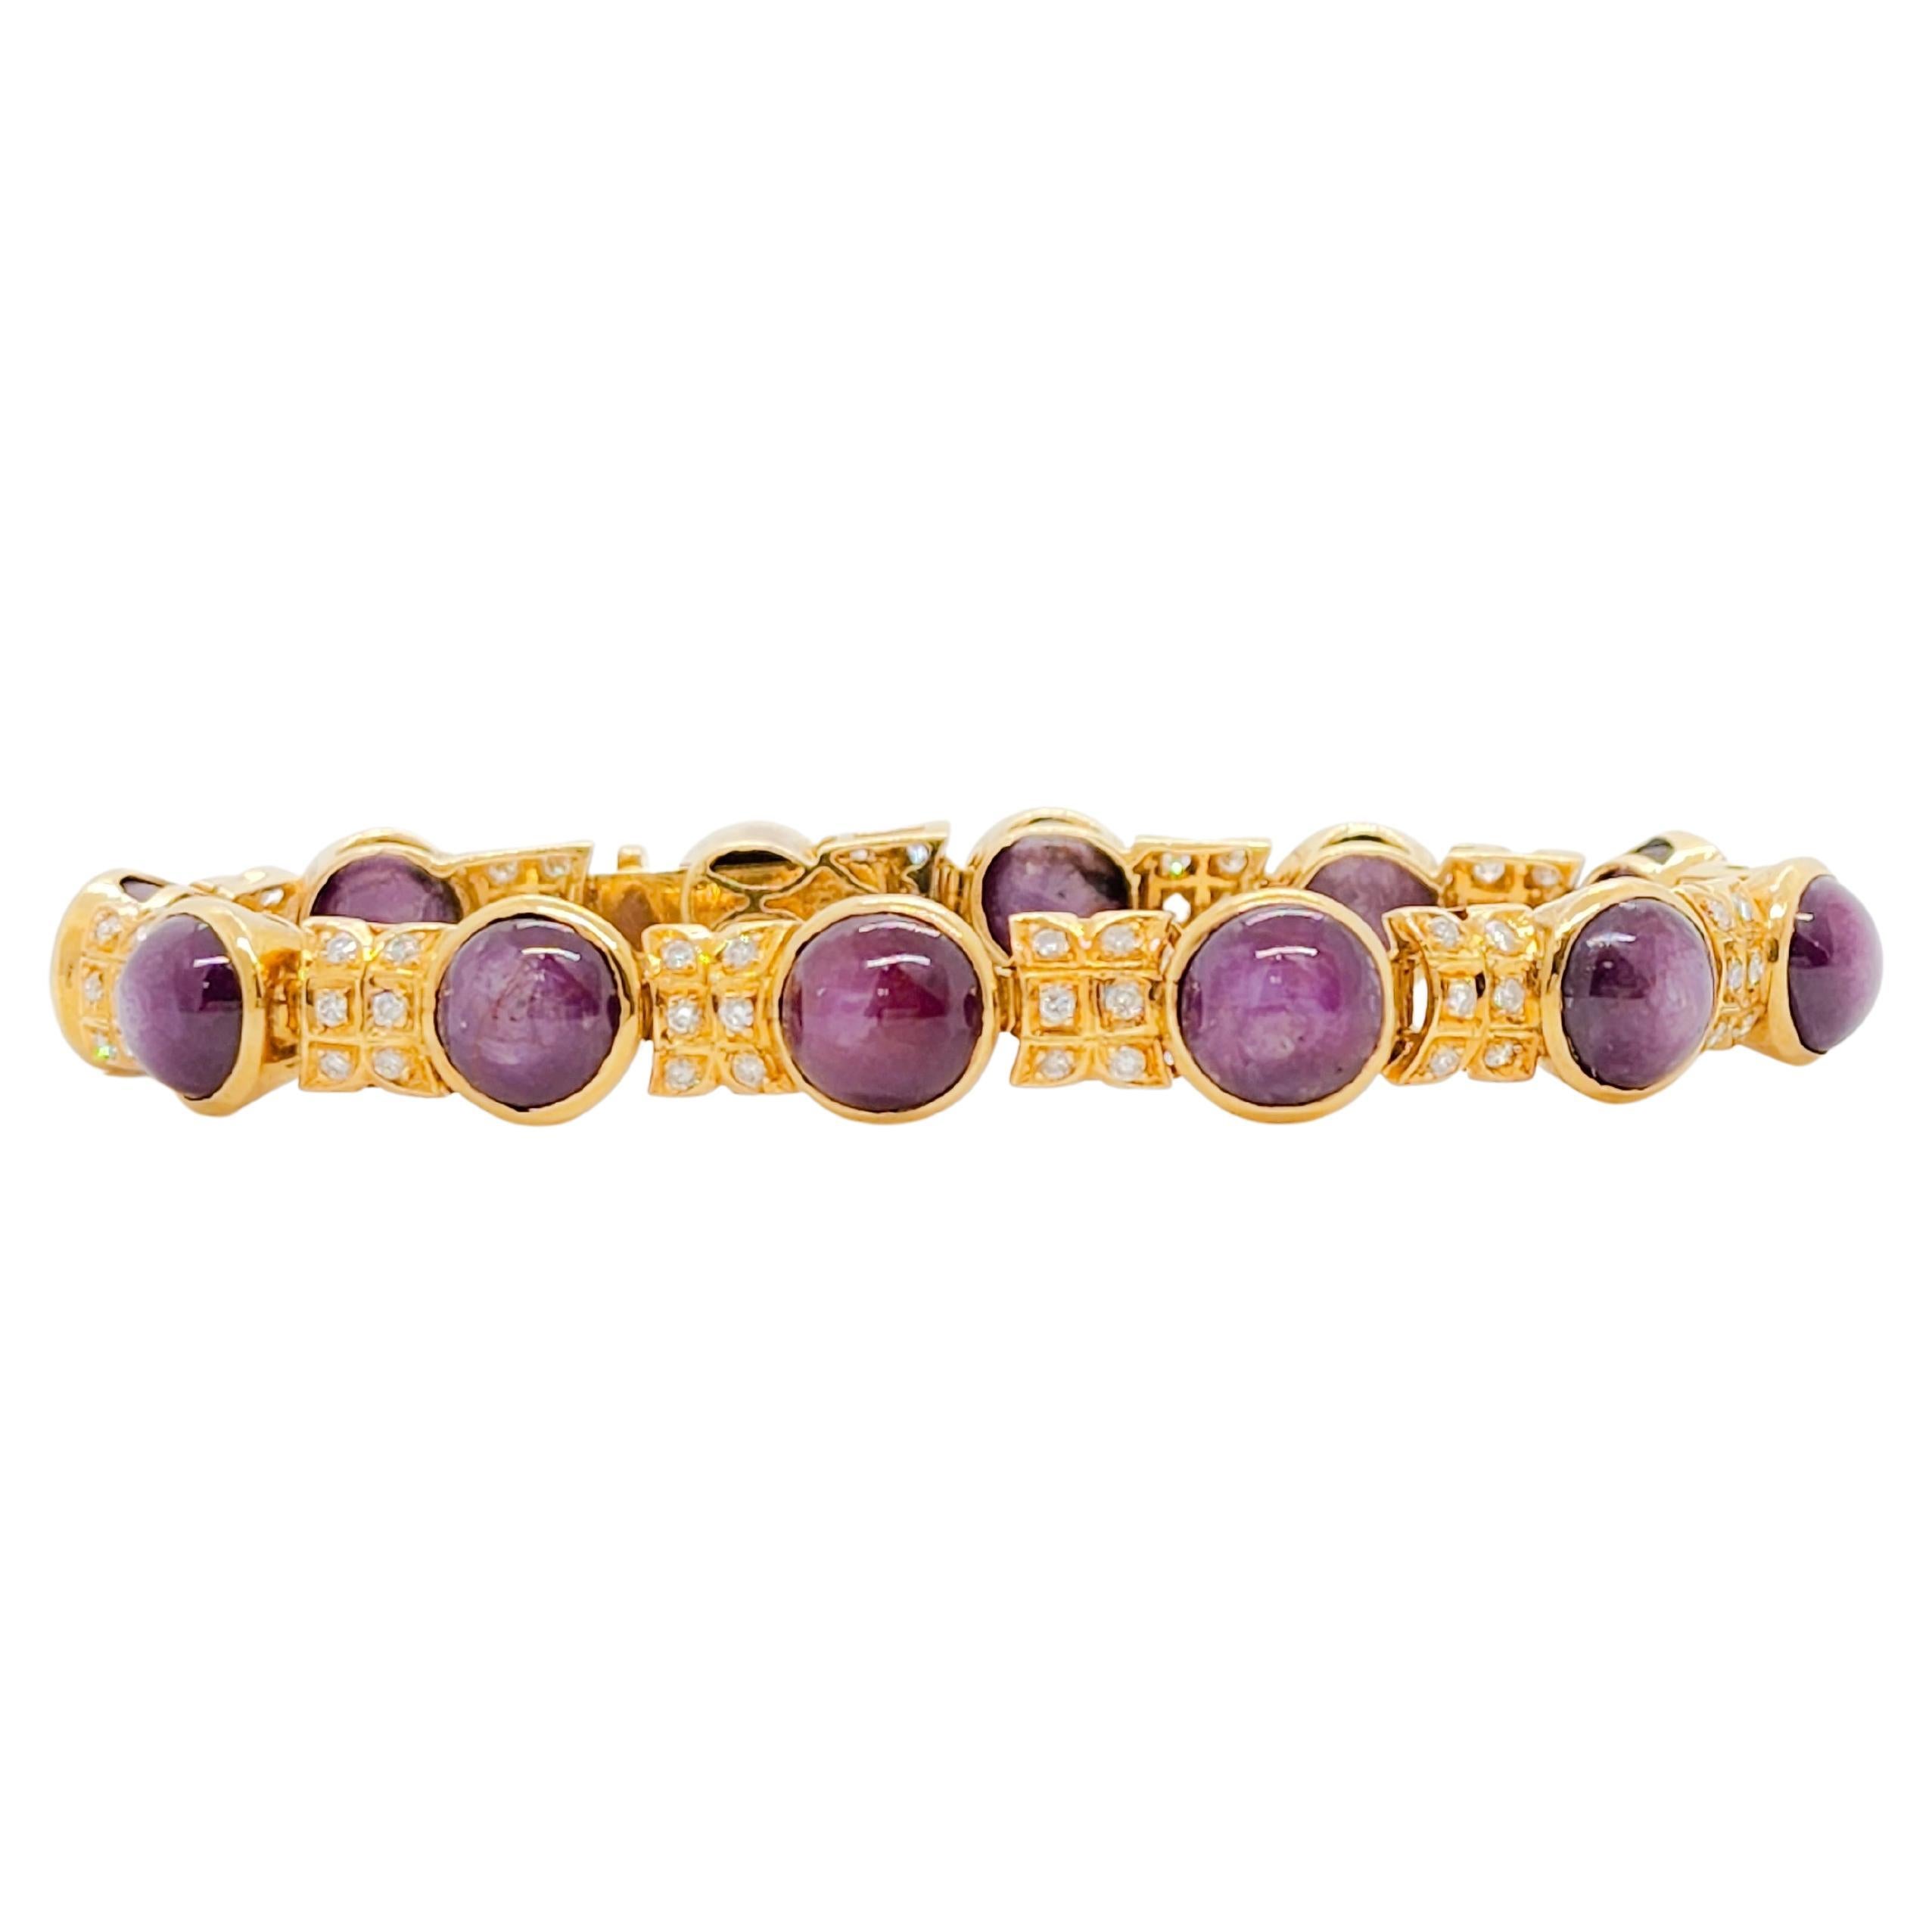 Star Ruby Cabochon and White Diamond Bracelet in 18k Yellow Gold